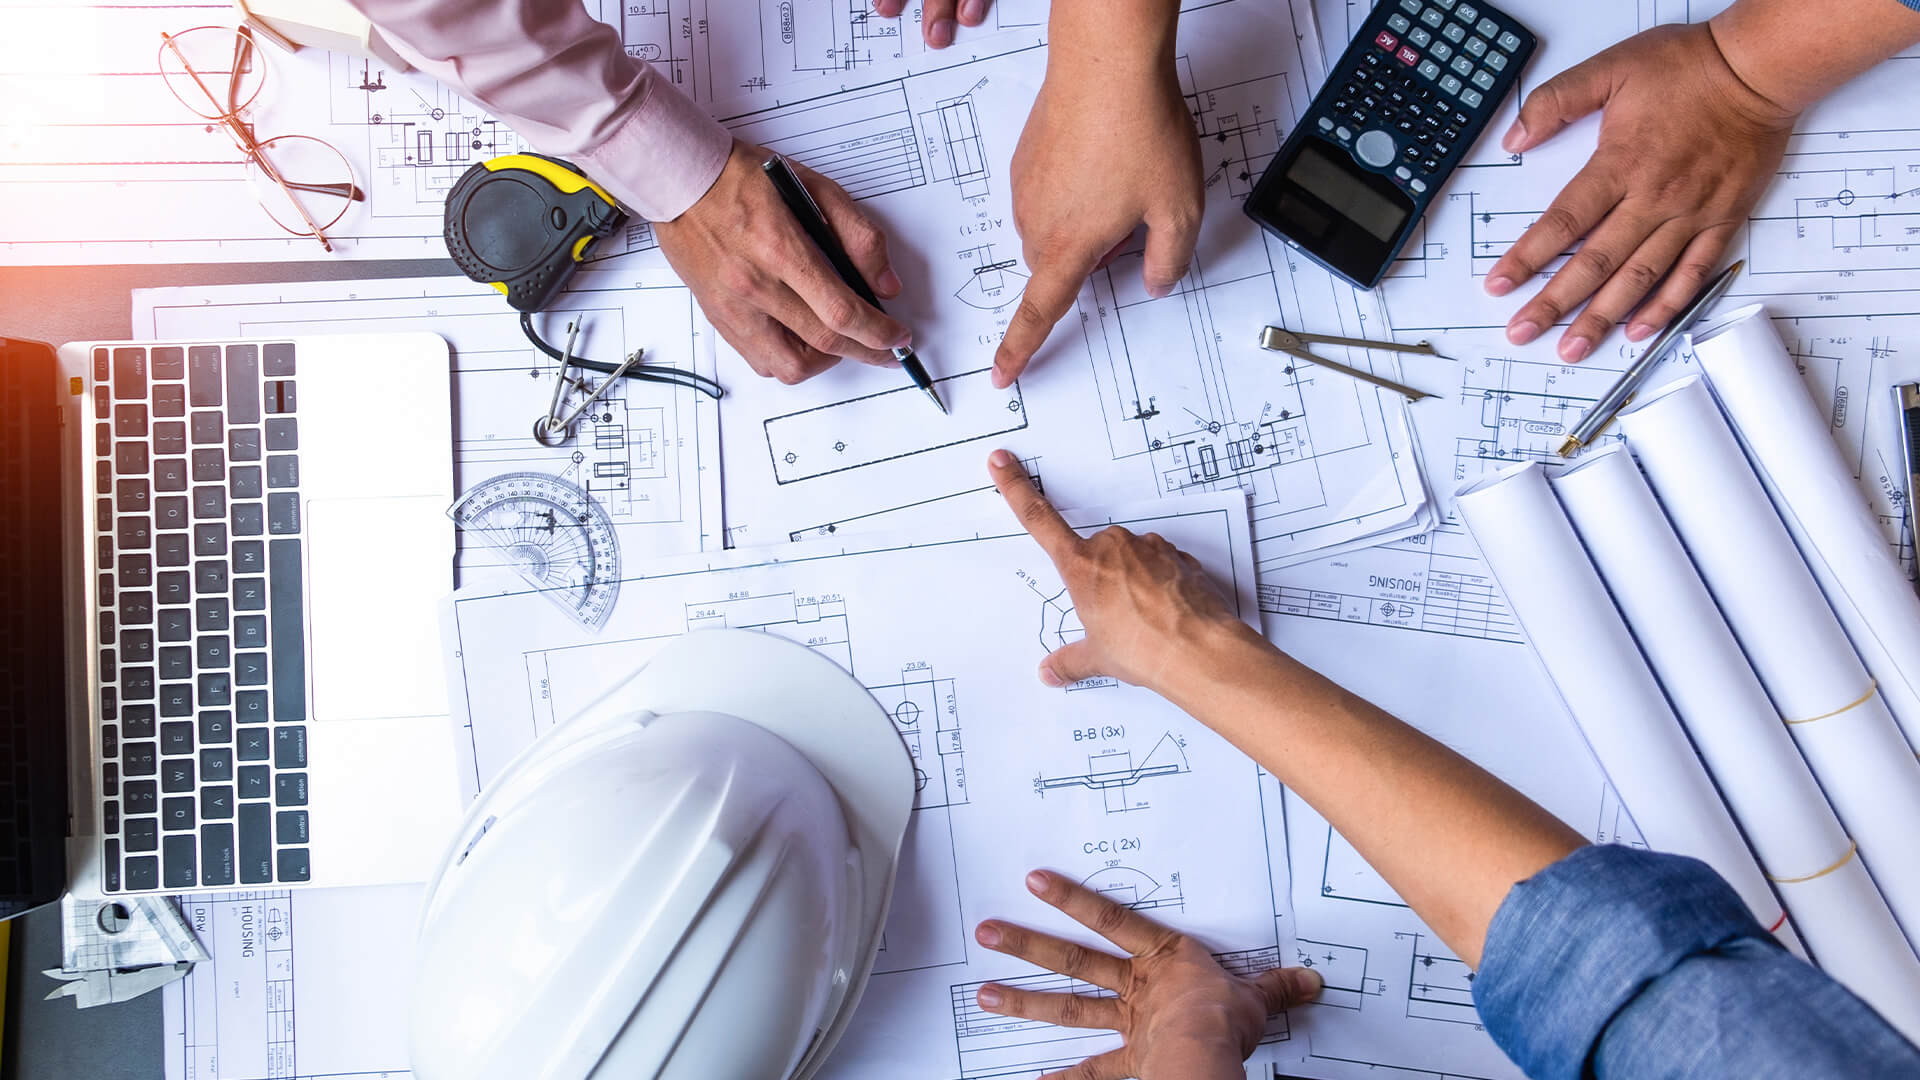 How to start a civil engineering company - Build Magazine